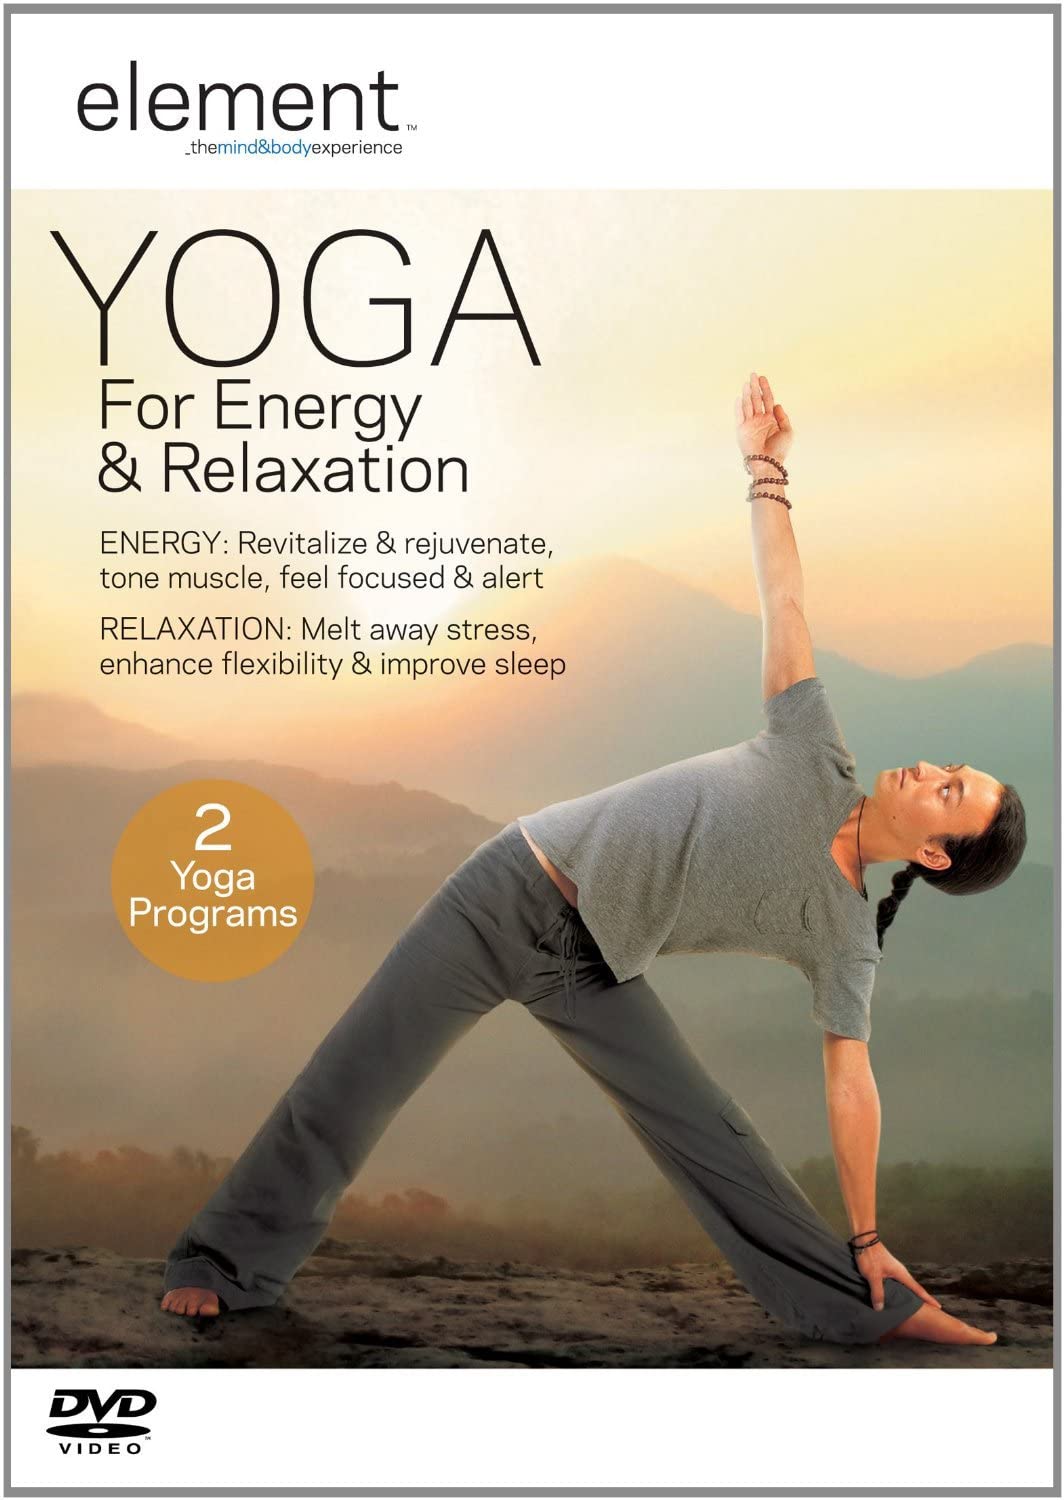 Element: Yoga For Energy And Relaxation [DVD]